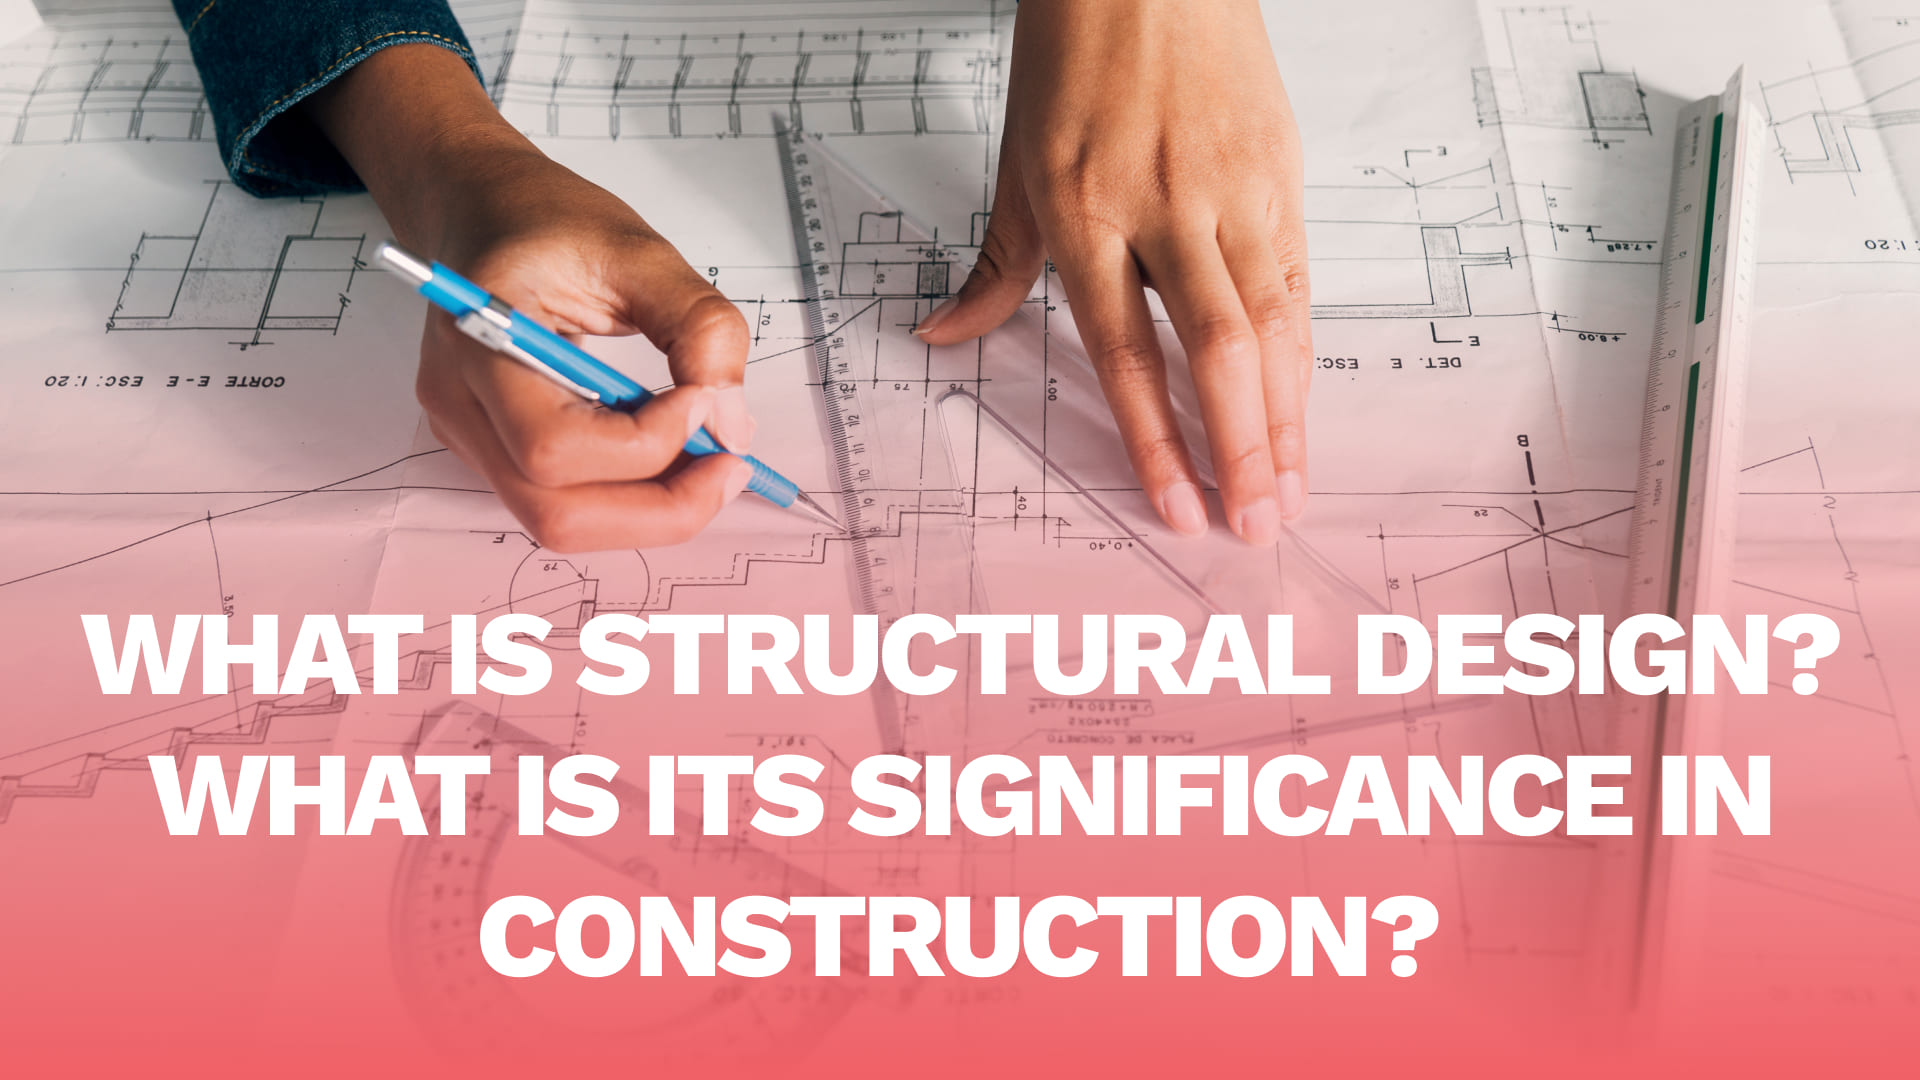 You are currently viewing What is Structural Design? What is its significance in Construction?